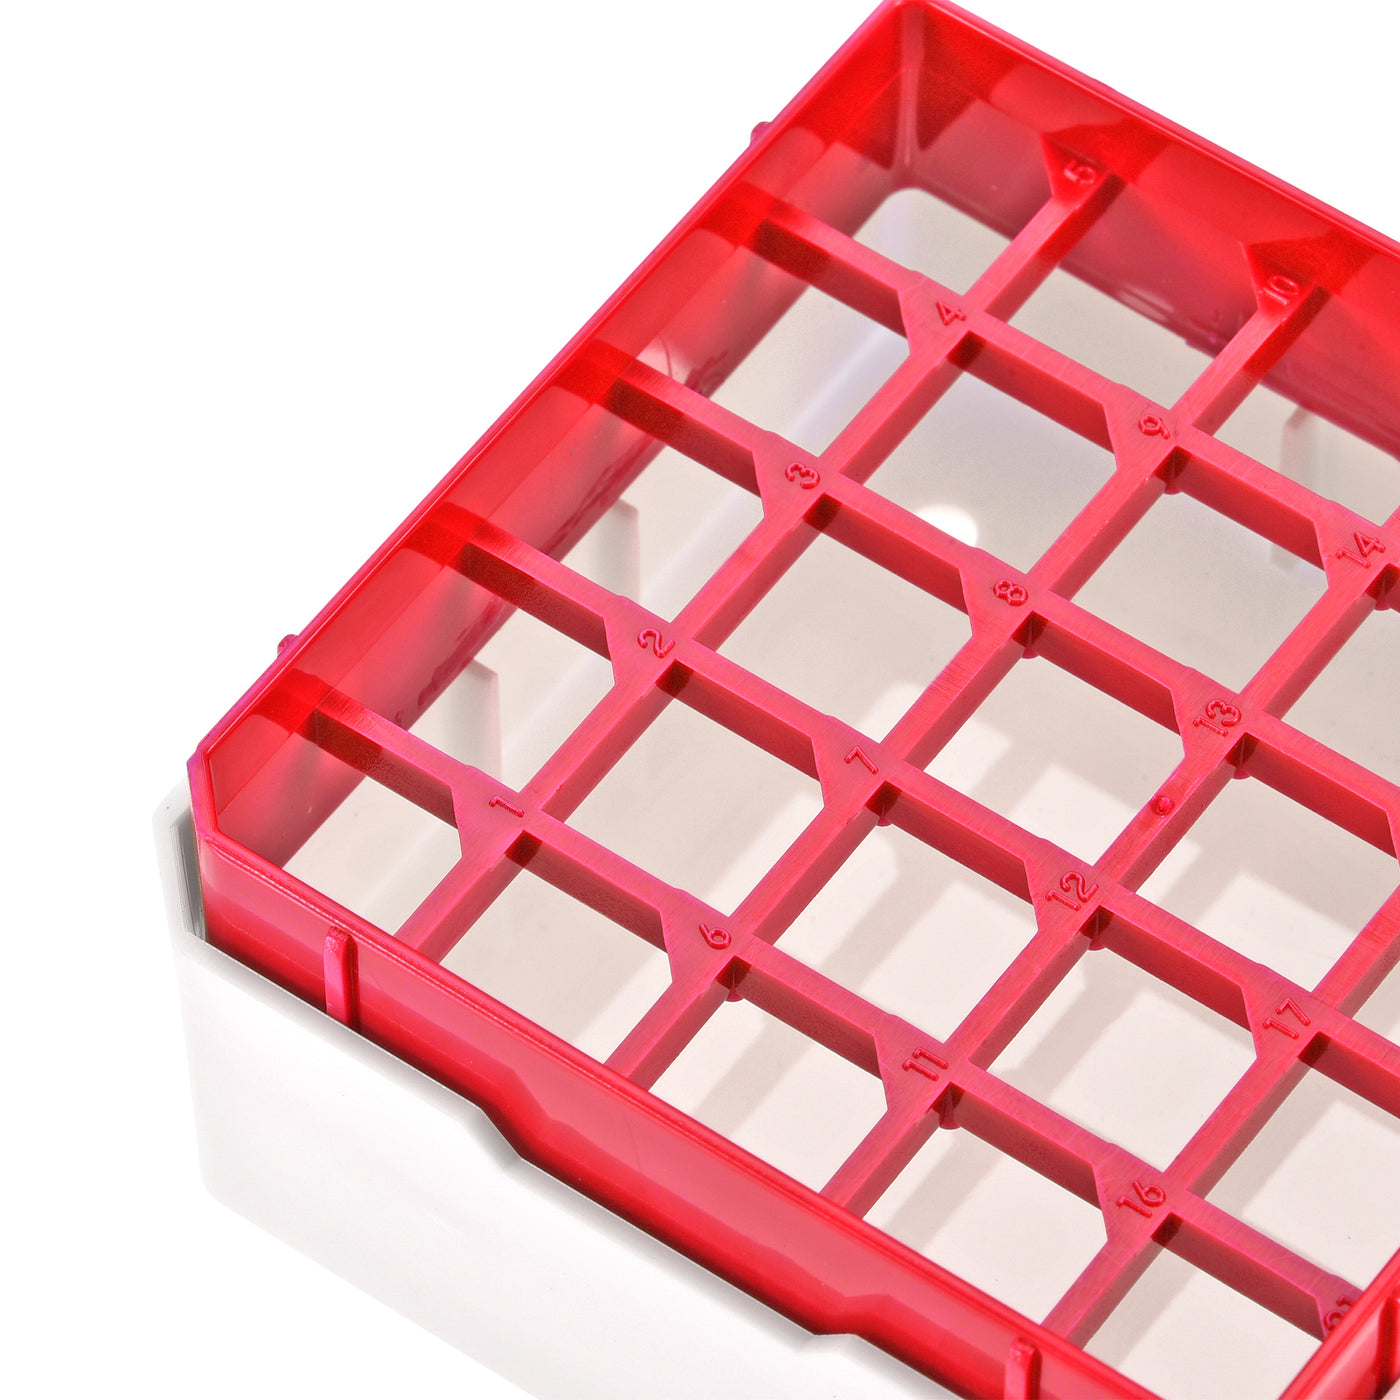 uxcell Uxcell Freezer Tube Box 25 Places Polypropylene Holder Rack for 1.8/2ml Microcentrifuge Tubes, Red